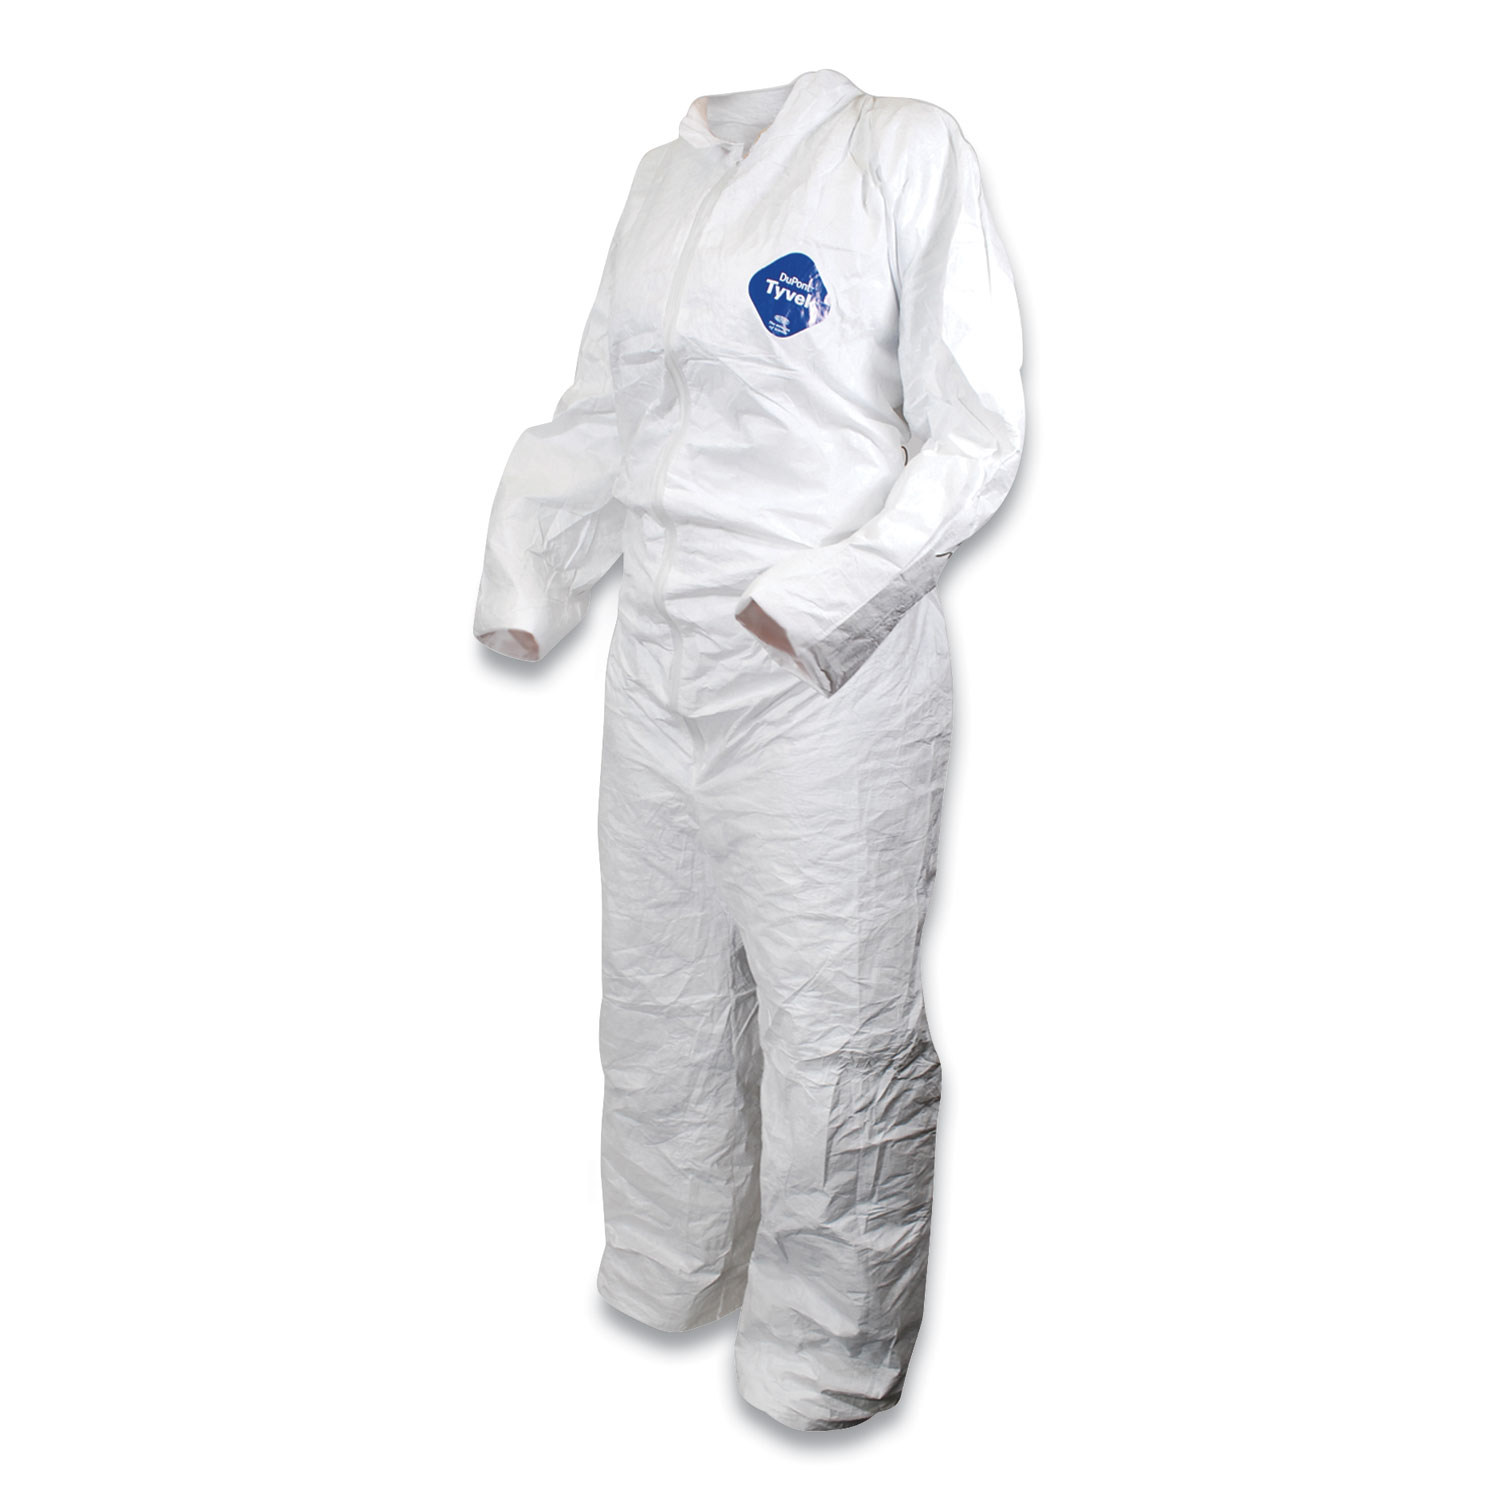 GN1 DuPont Tyvek Disposable Coverall, 2X-Large, White, 25/Carton